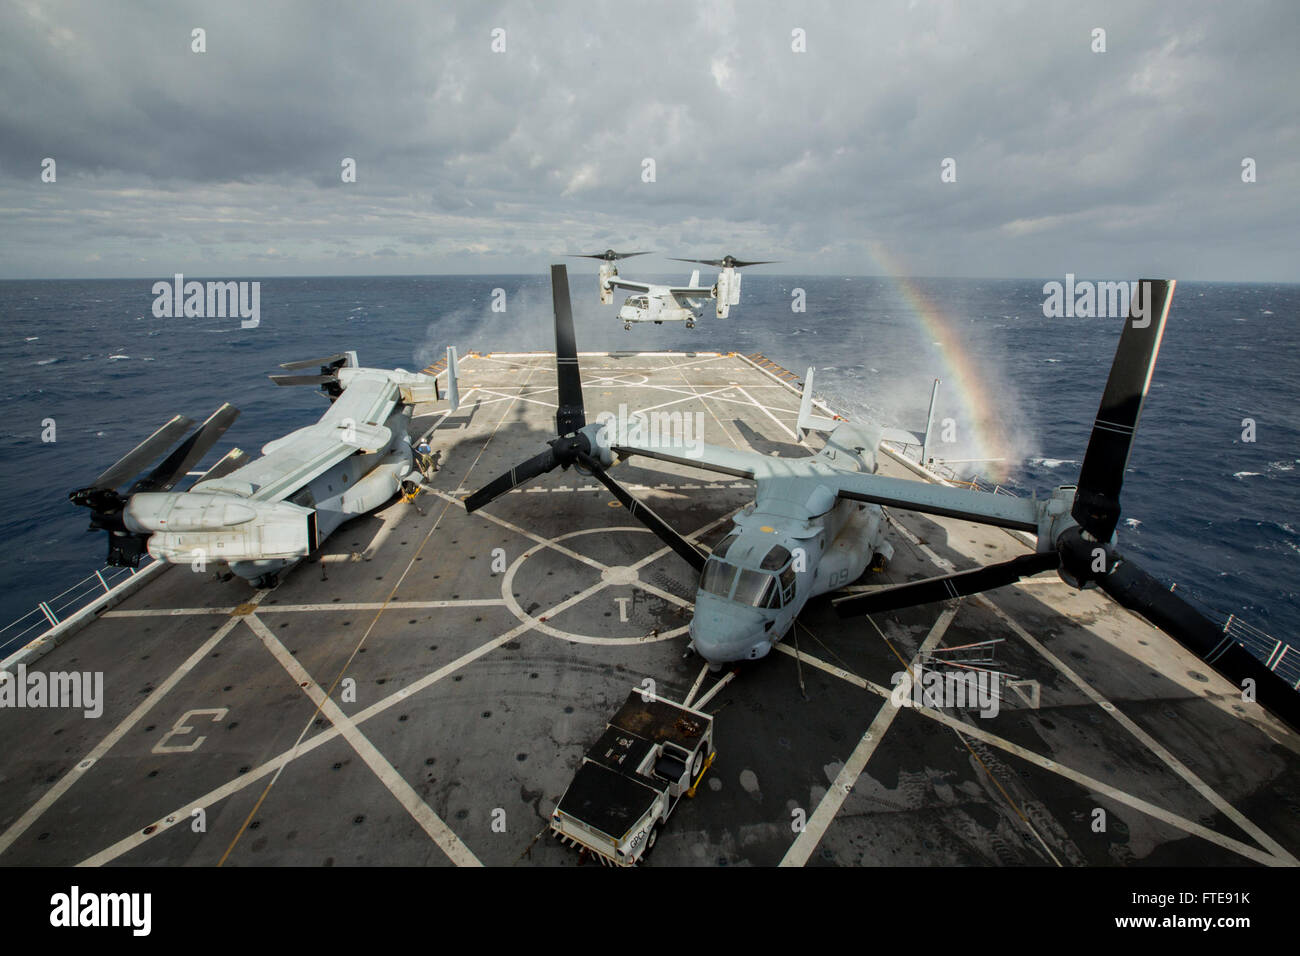 150105-M-YH418-003 MEDITERRANEAN SEA (Jan. 5, 2015) An MV-22B Osprey, assigned to Marine Medium Tiltrotor Squadron 365 (Reinforced), 24th Marine Expeditionary Unit, hovers over the flight deck of the USS New York (LPD 21), Jan. 5, 2015. The 24th MEU and Iwo Jima Amphibious Ready Group are conducting naval operations in the U.S. 6th Fleet area of operations in support of U.S. national security interests in Europe. (U.S. Marine Corps photo by Cpl. Todd F. Michalek/Released) Stock Photo